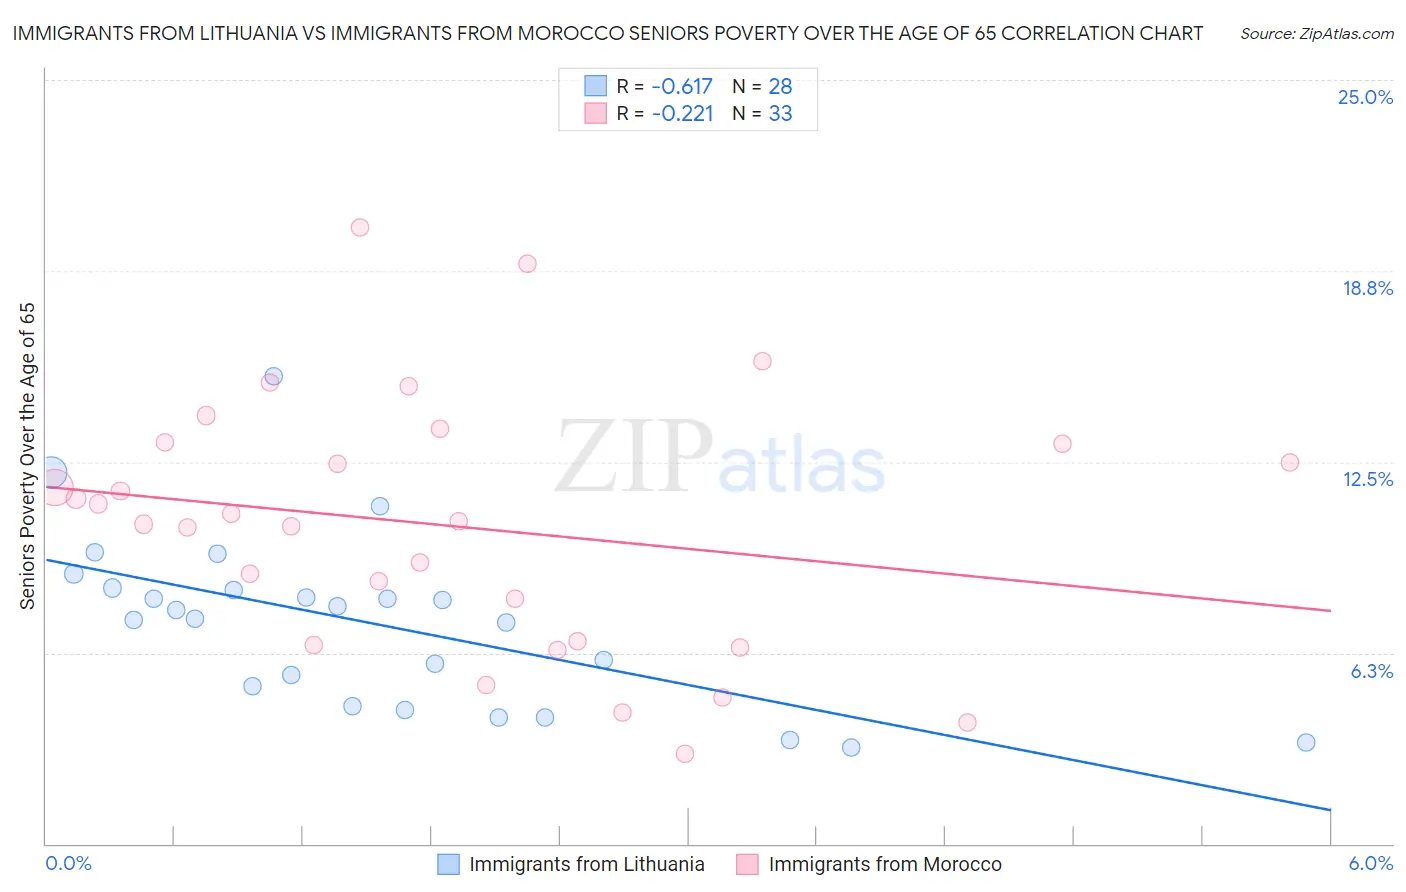 Immigrants from Lithuania vs Immigrants from Morocco Seniors Poverty Over the Age of 65